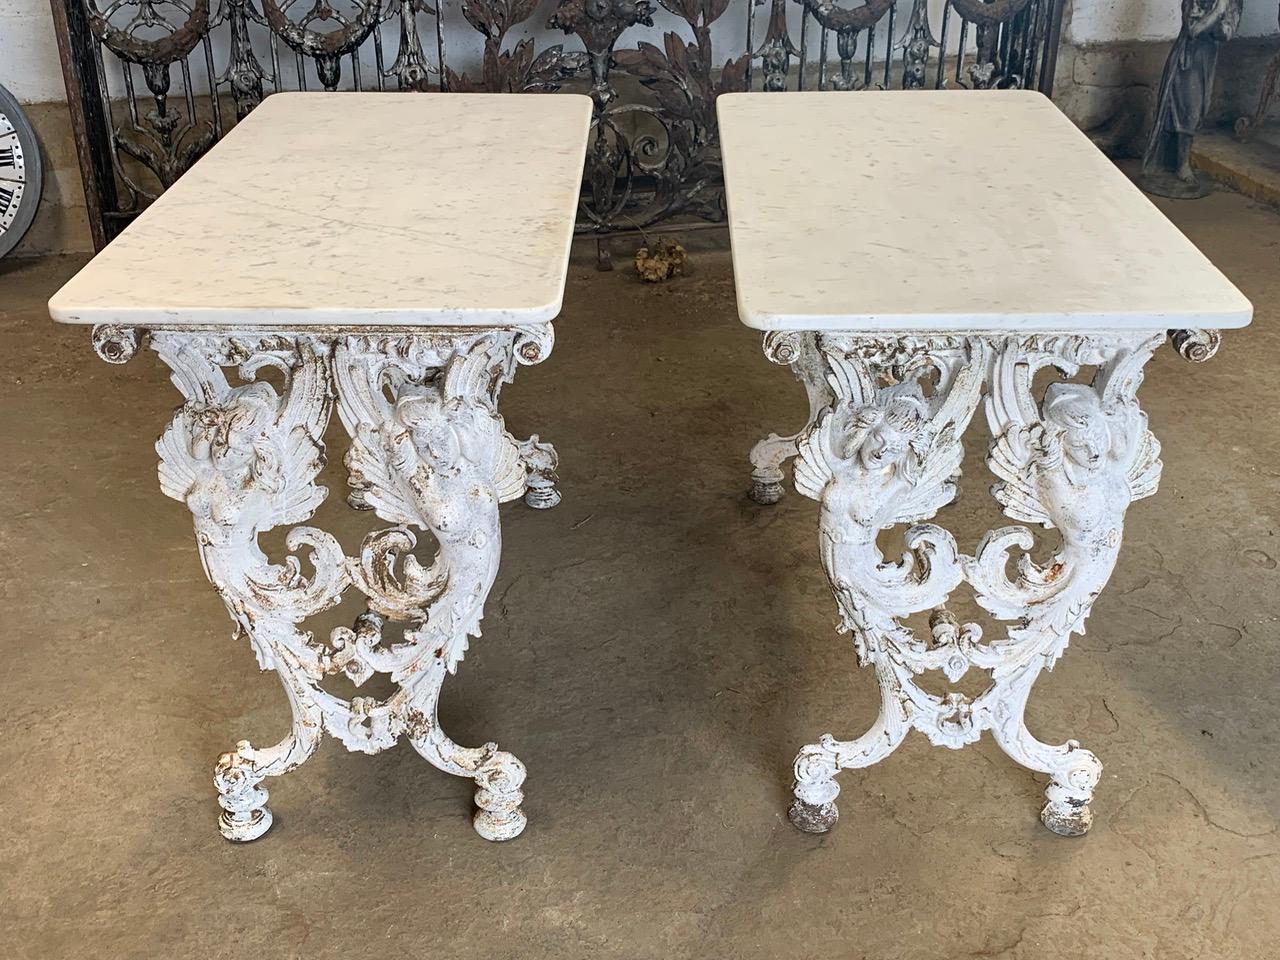 A stunning and rare pair of Italian bistro tables with winged Angels. The bases are cast iron with original marble tops. These would make beautiful garden tables as well as indoor tables. They can also be pushed together to make a larger table.